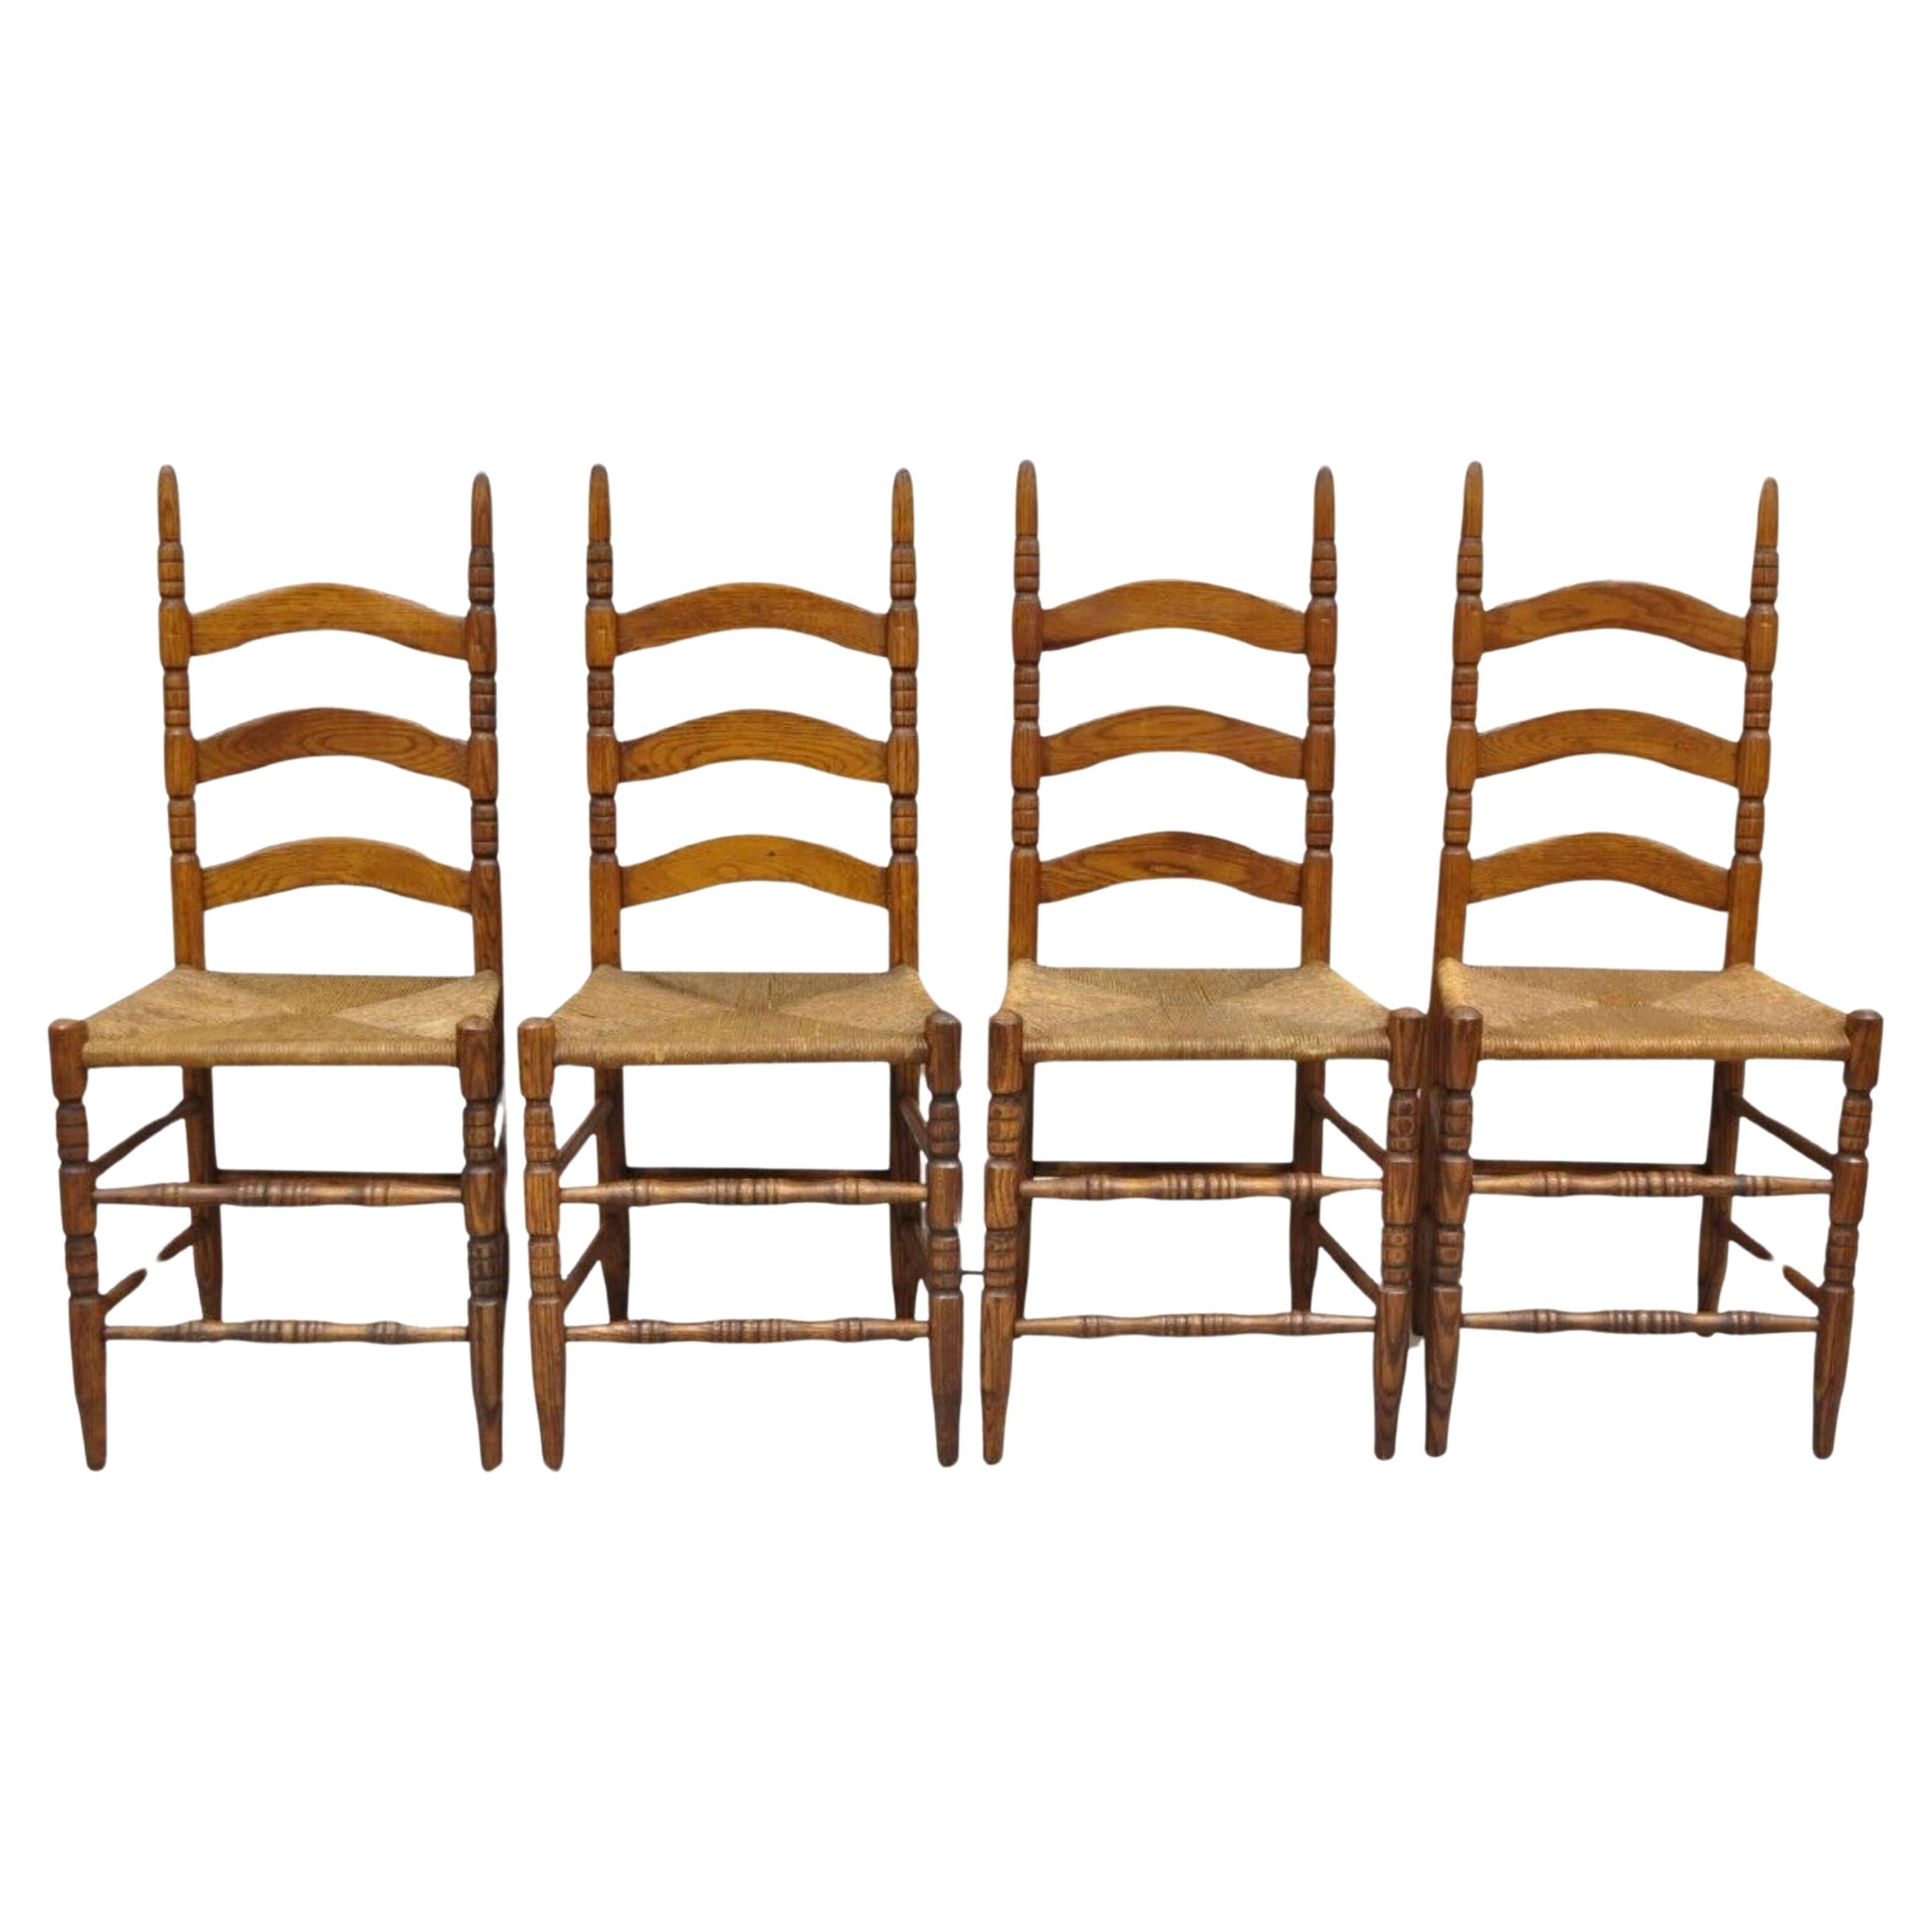 Antique Ladderback Primitive Rustic Oak Wood Rush Seat Dining Chairs - Set of 4 For Sale